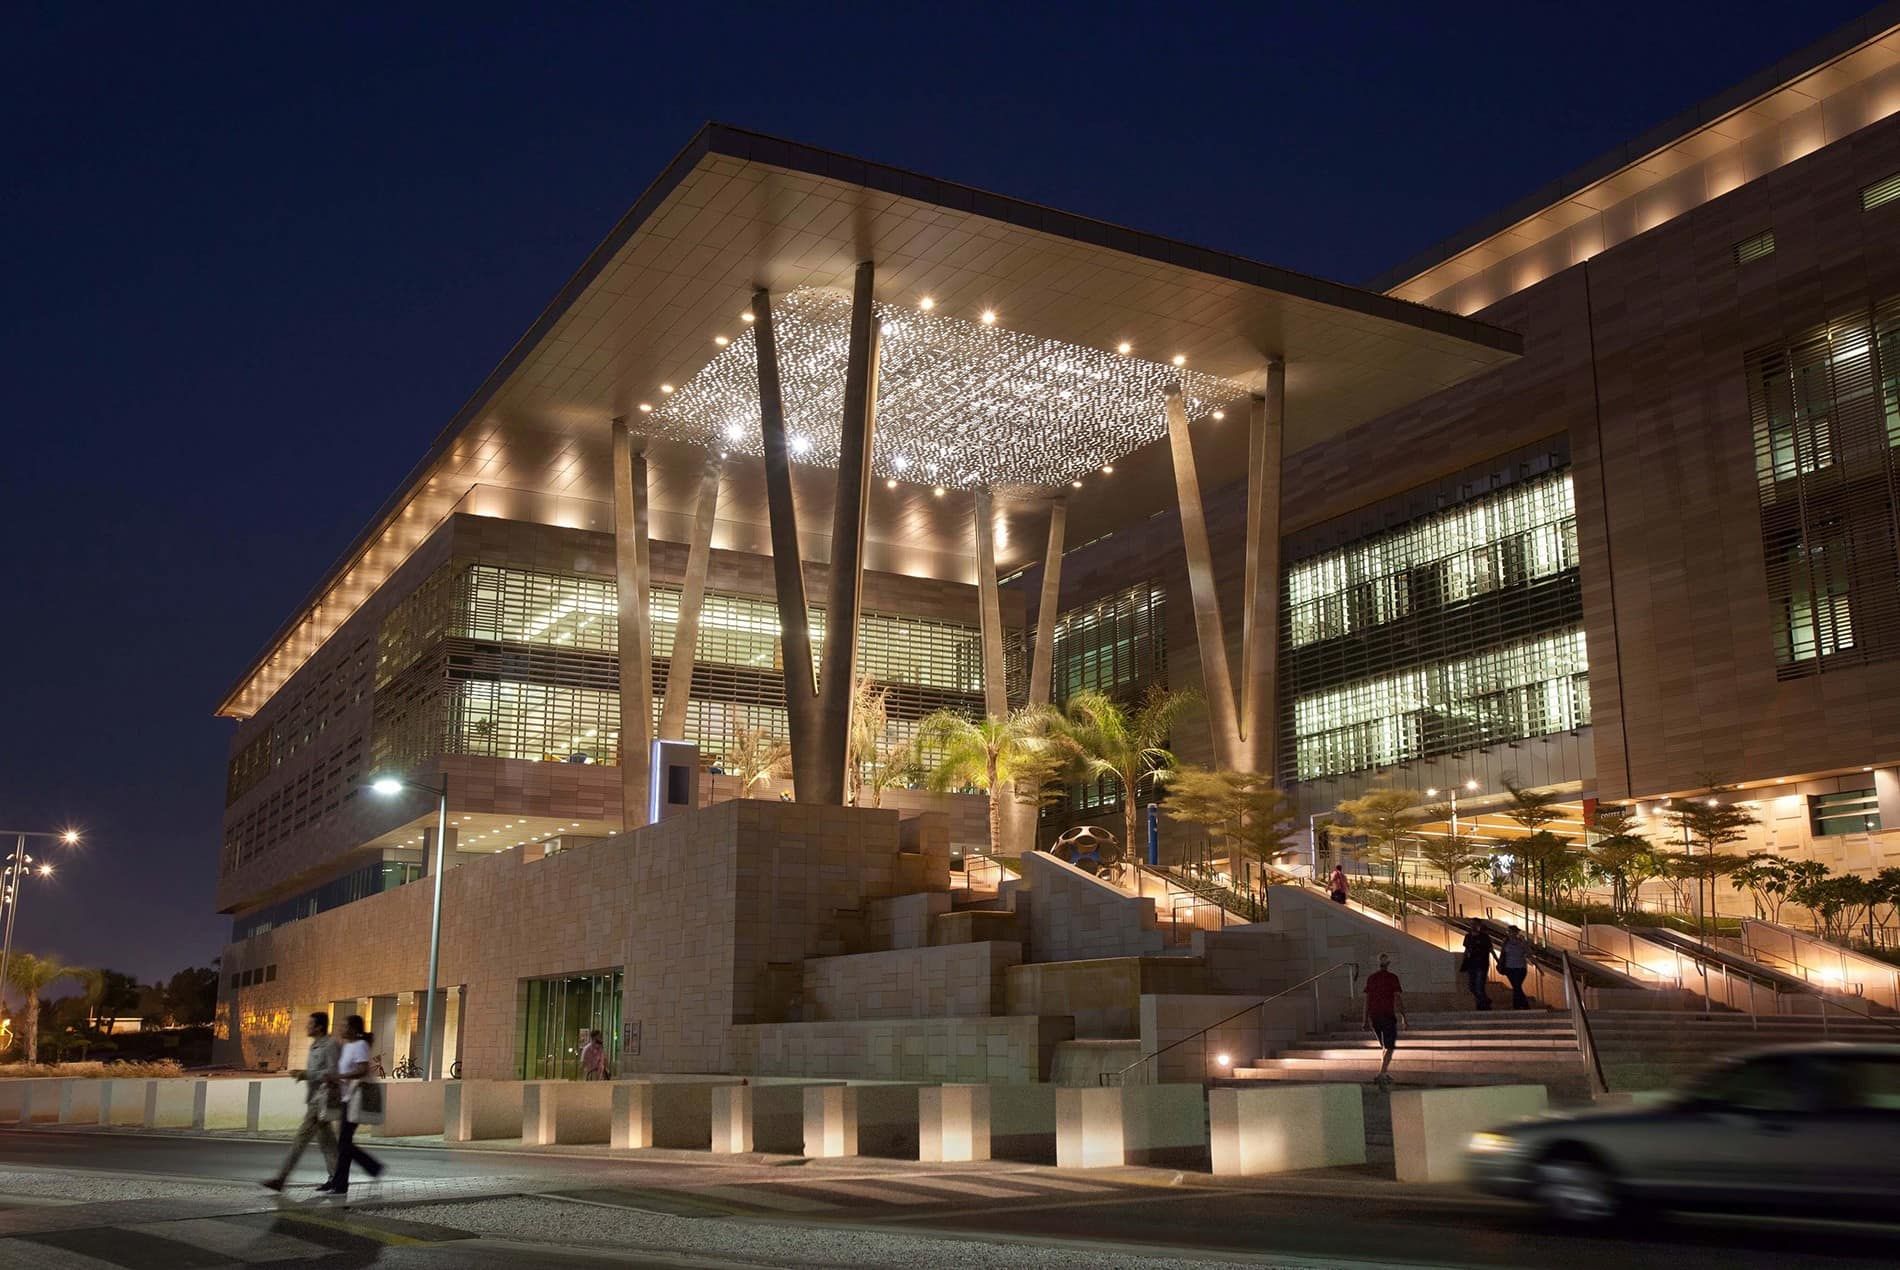 The exterior view of KAUST campus lit up at night